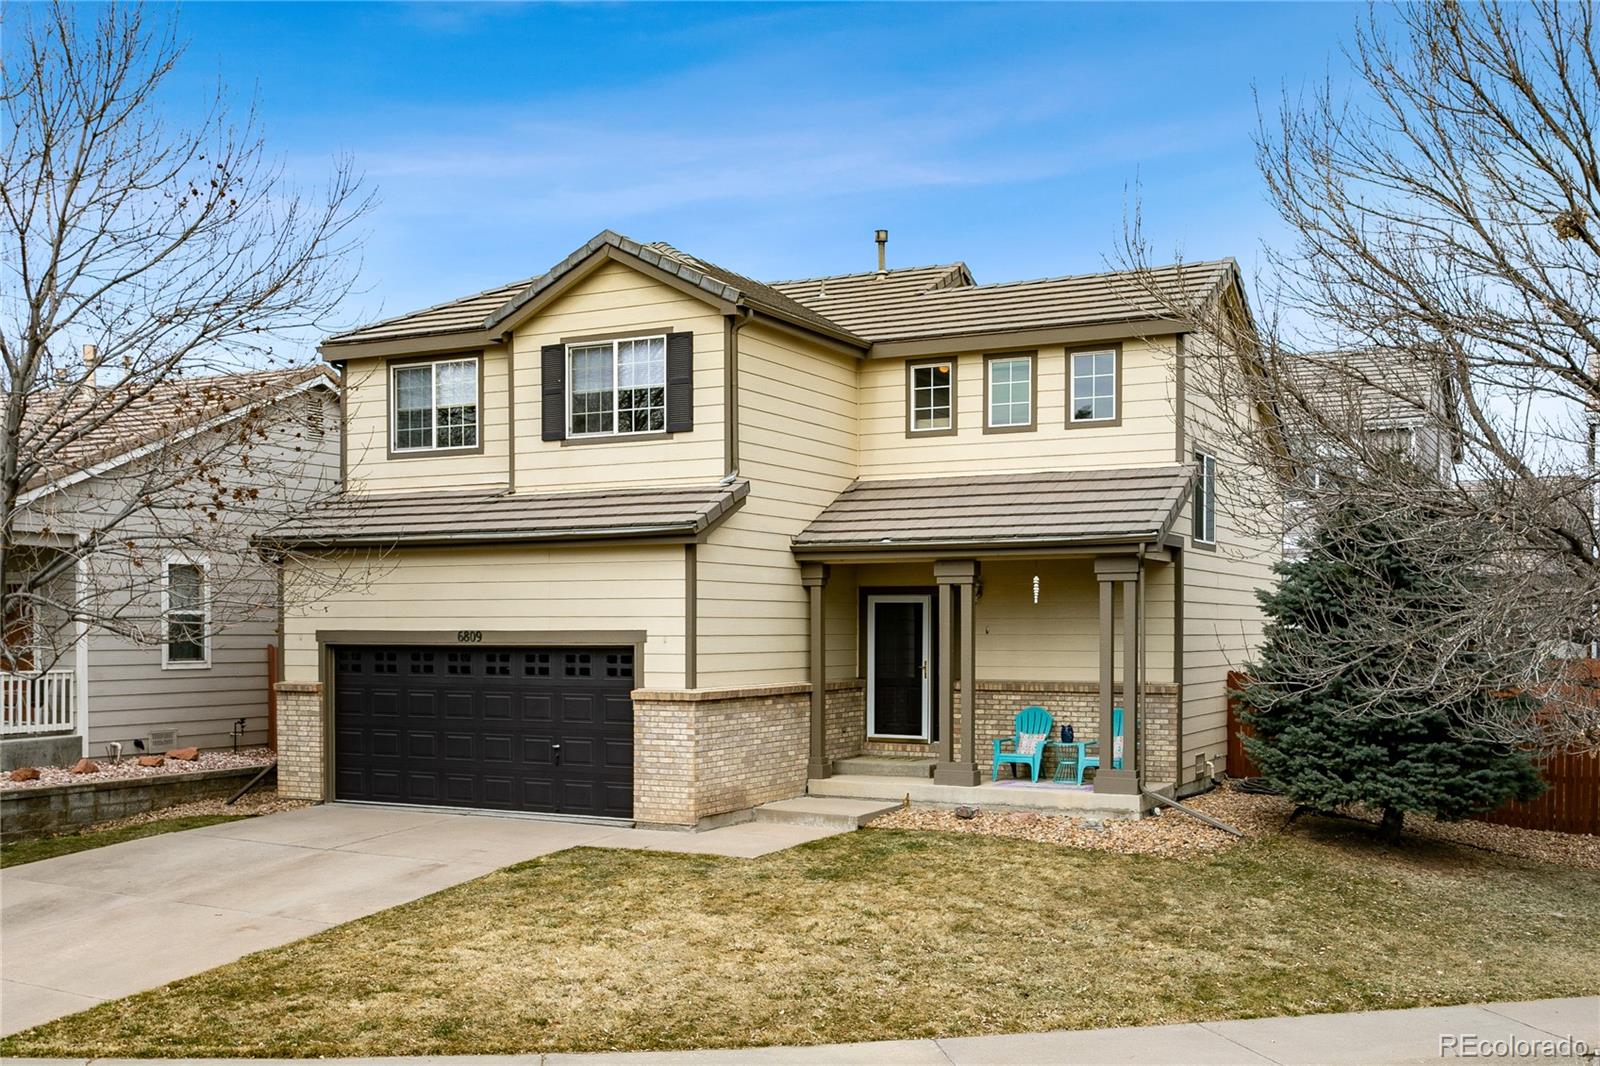 6809 w san juan place, littleton sold home. Closed on 2024-05-01 for $569,500.